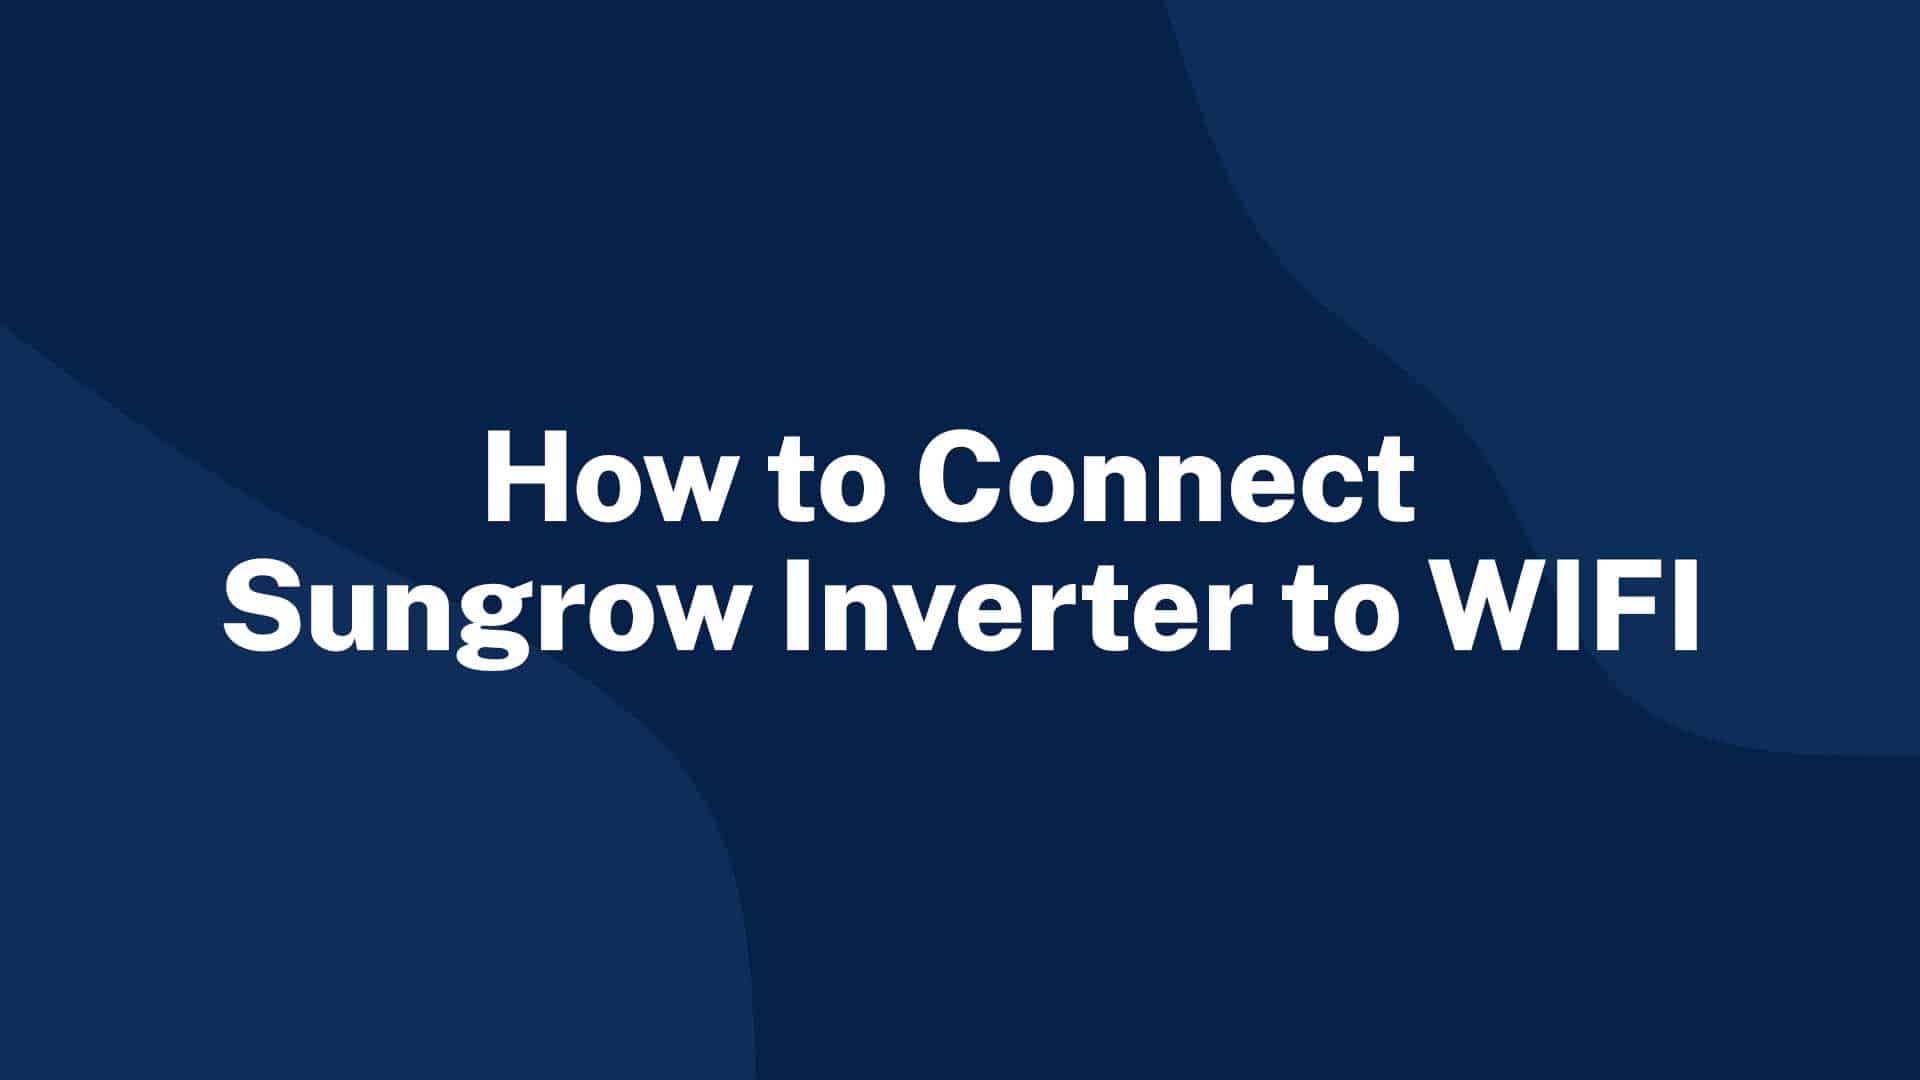 How to Connect Sungrow Inverter to WIFI